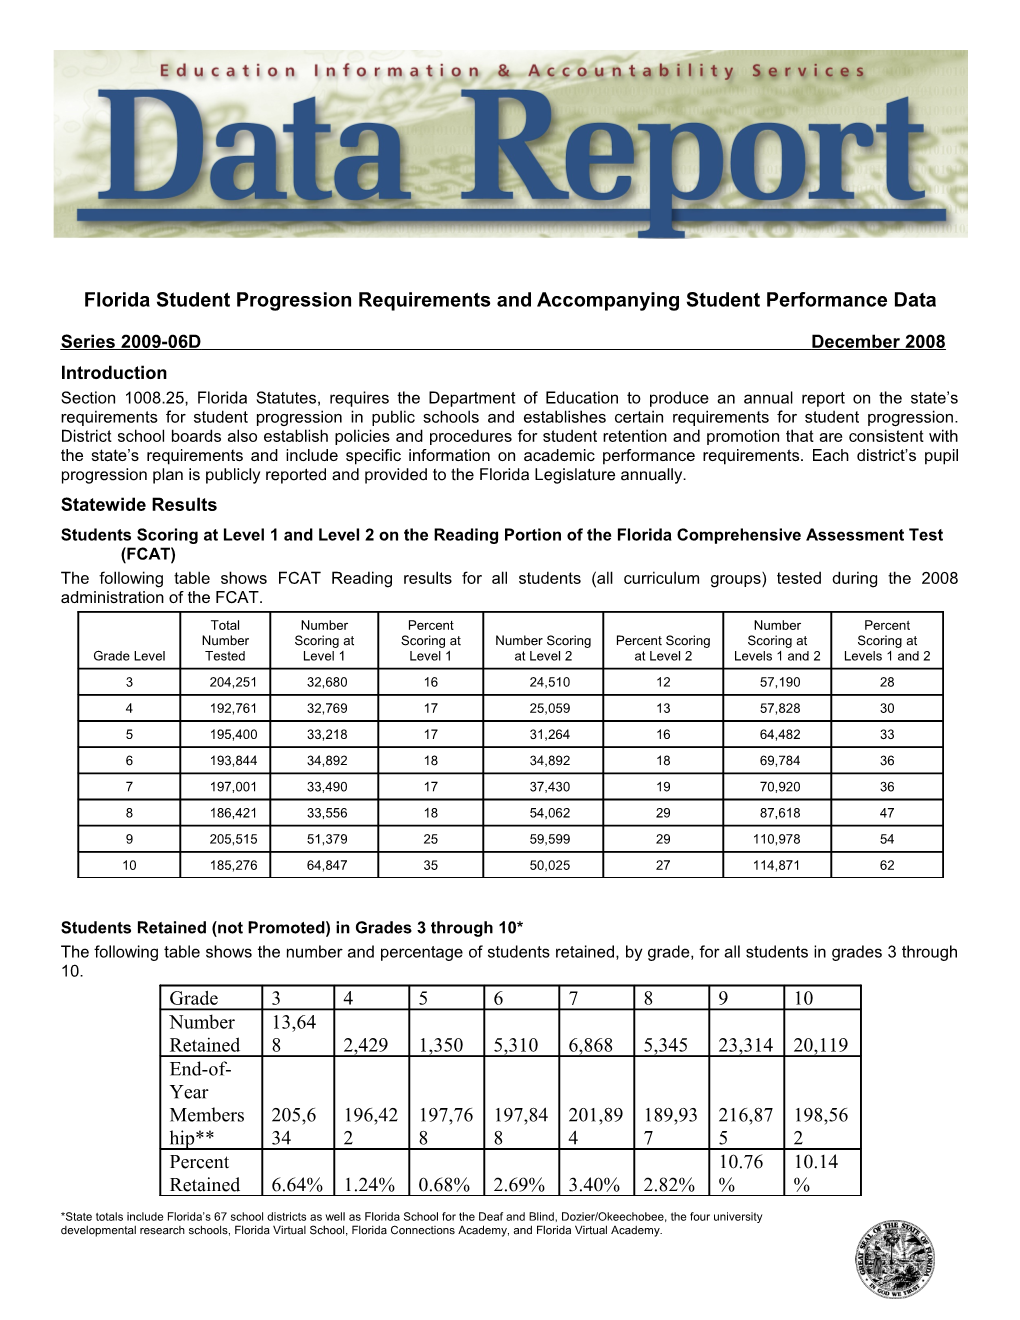 Florida Student Progression Requirements and Accompanying Student Performance Data